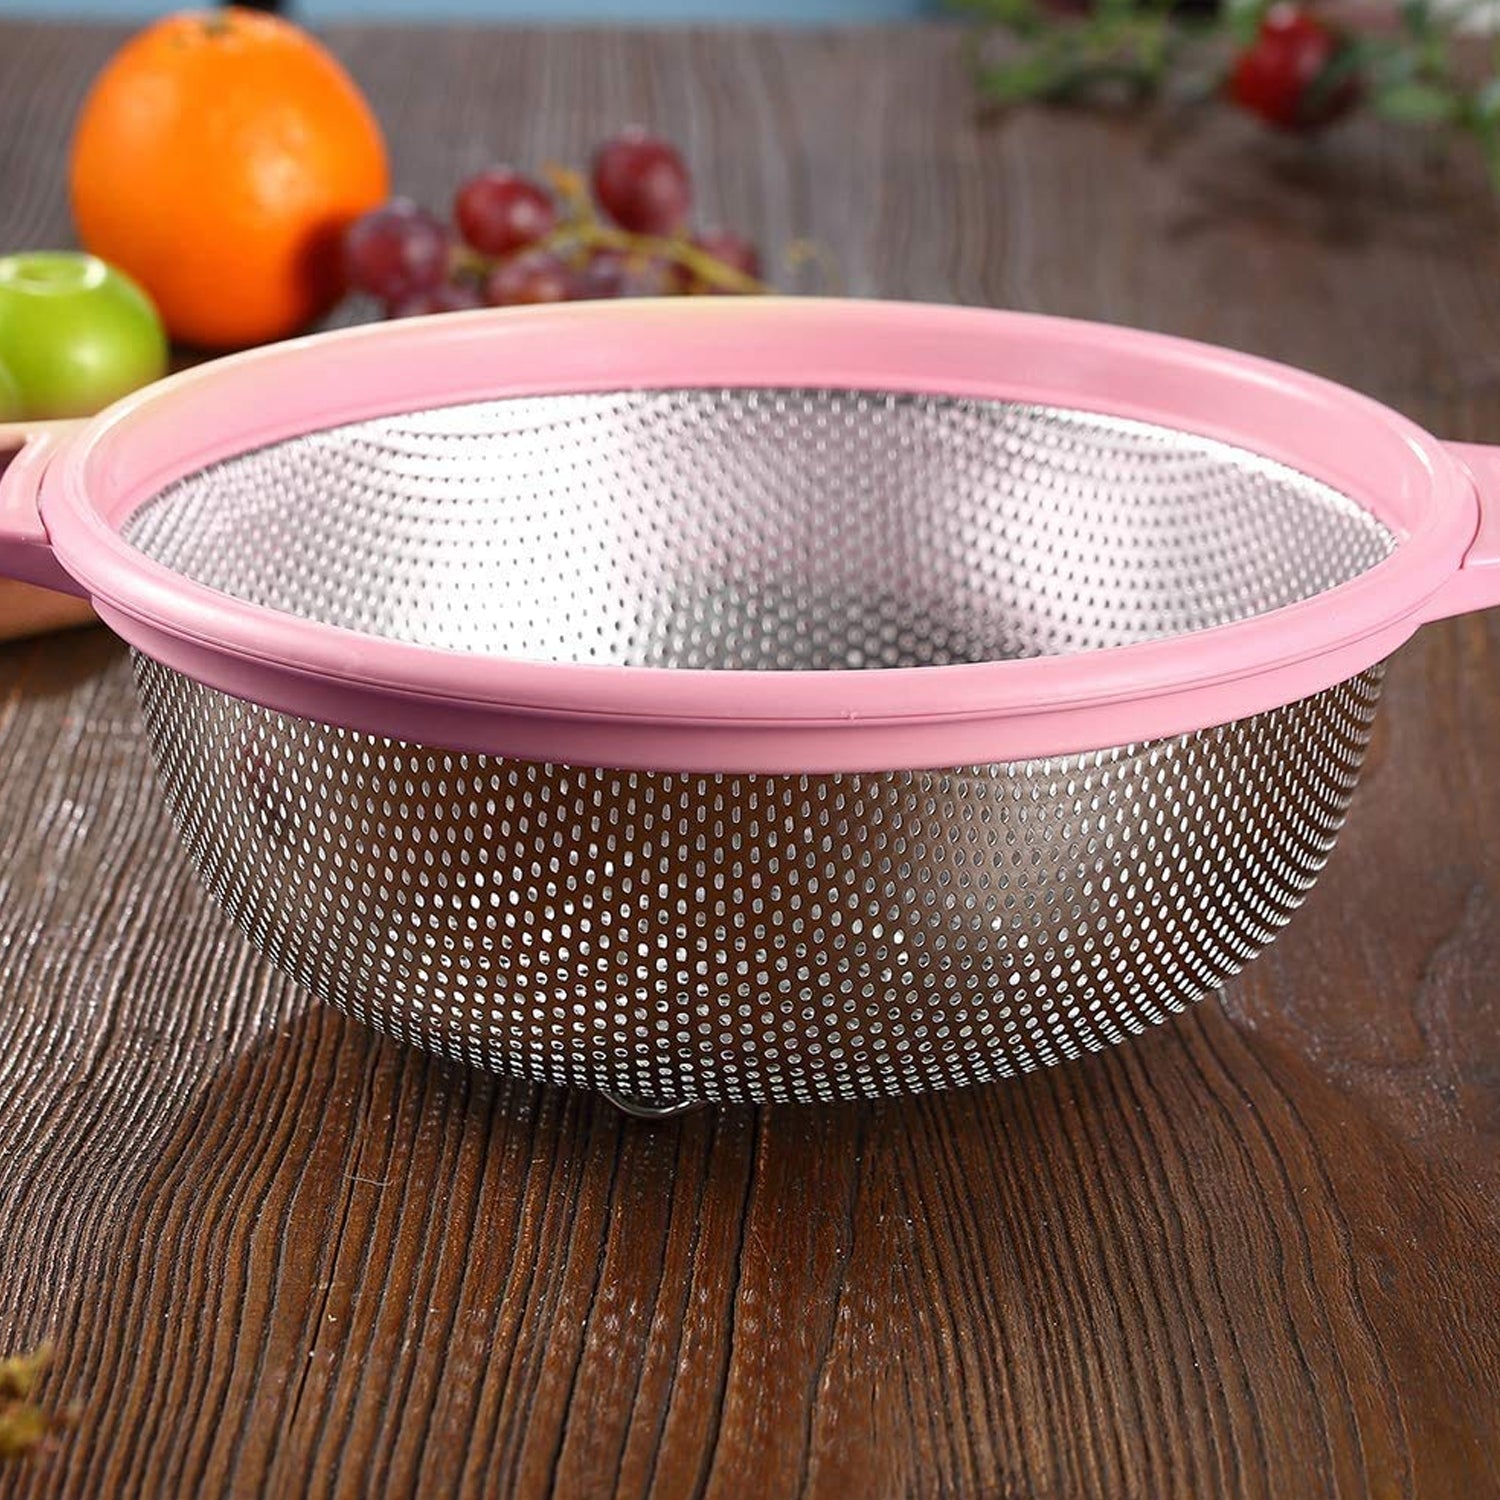 7145 Stainless Steel Colander with Handle, Large Metal Green Strainer for Pasta, Spaghetti, Berry, Veggies, Fruits,  Kitchen Food Colander, Dishwasher Safe 